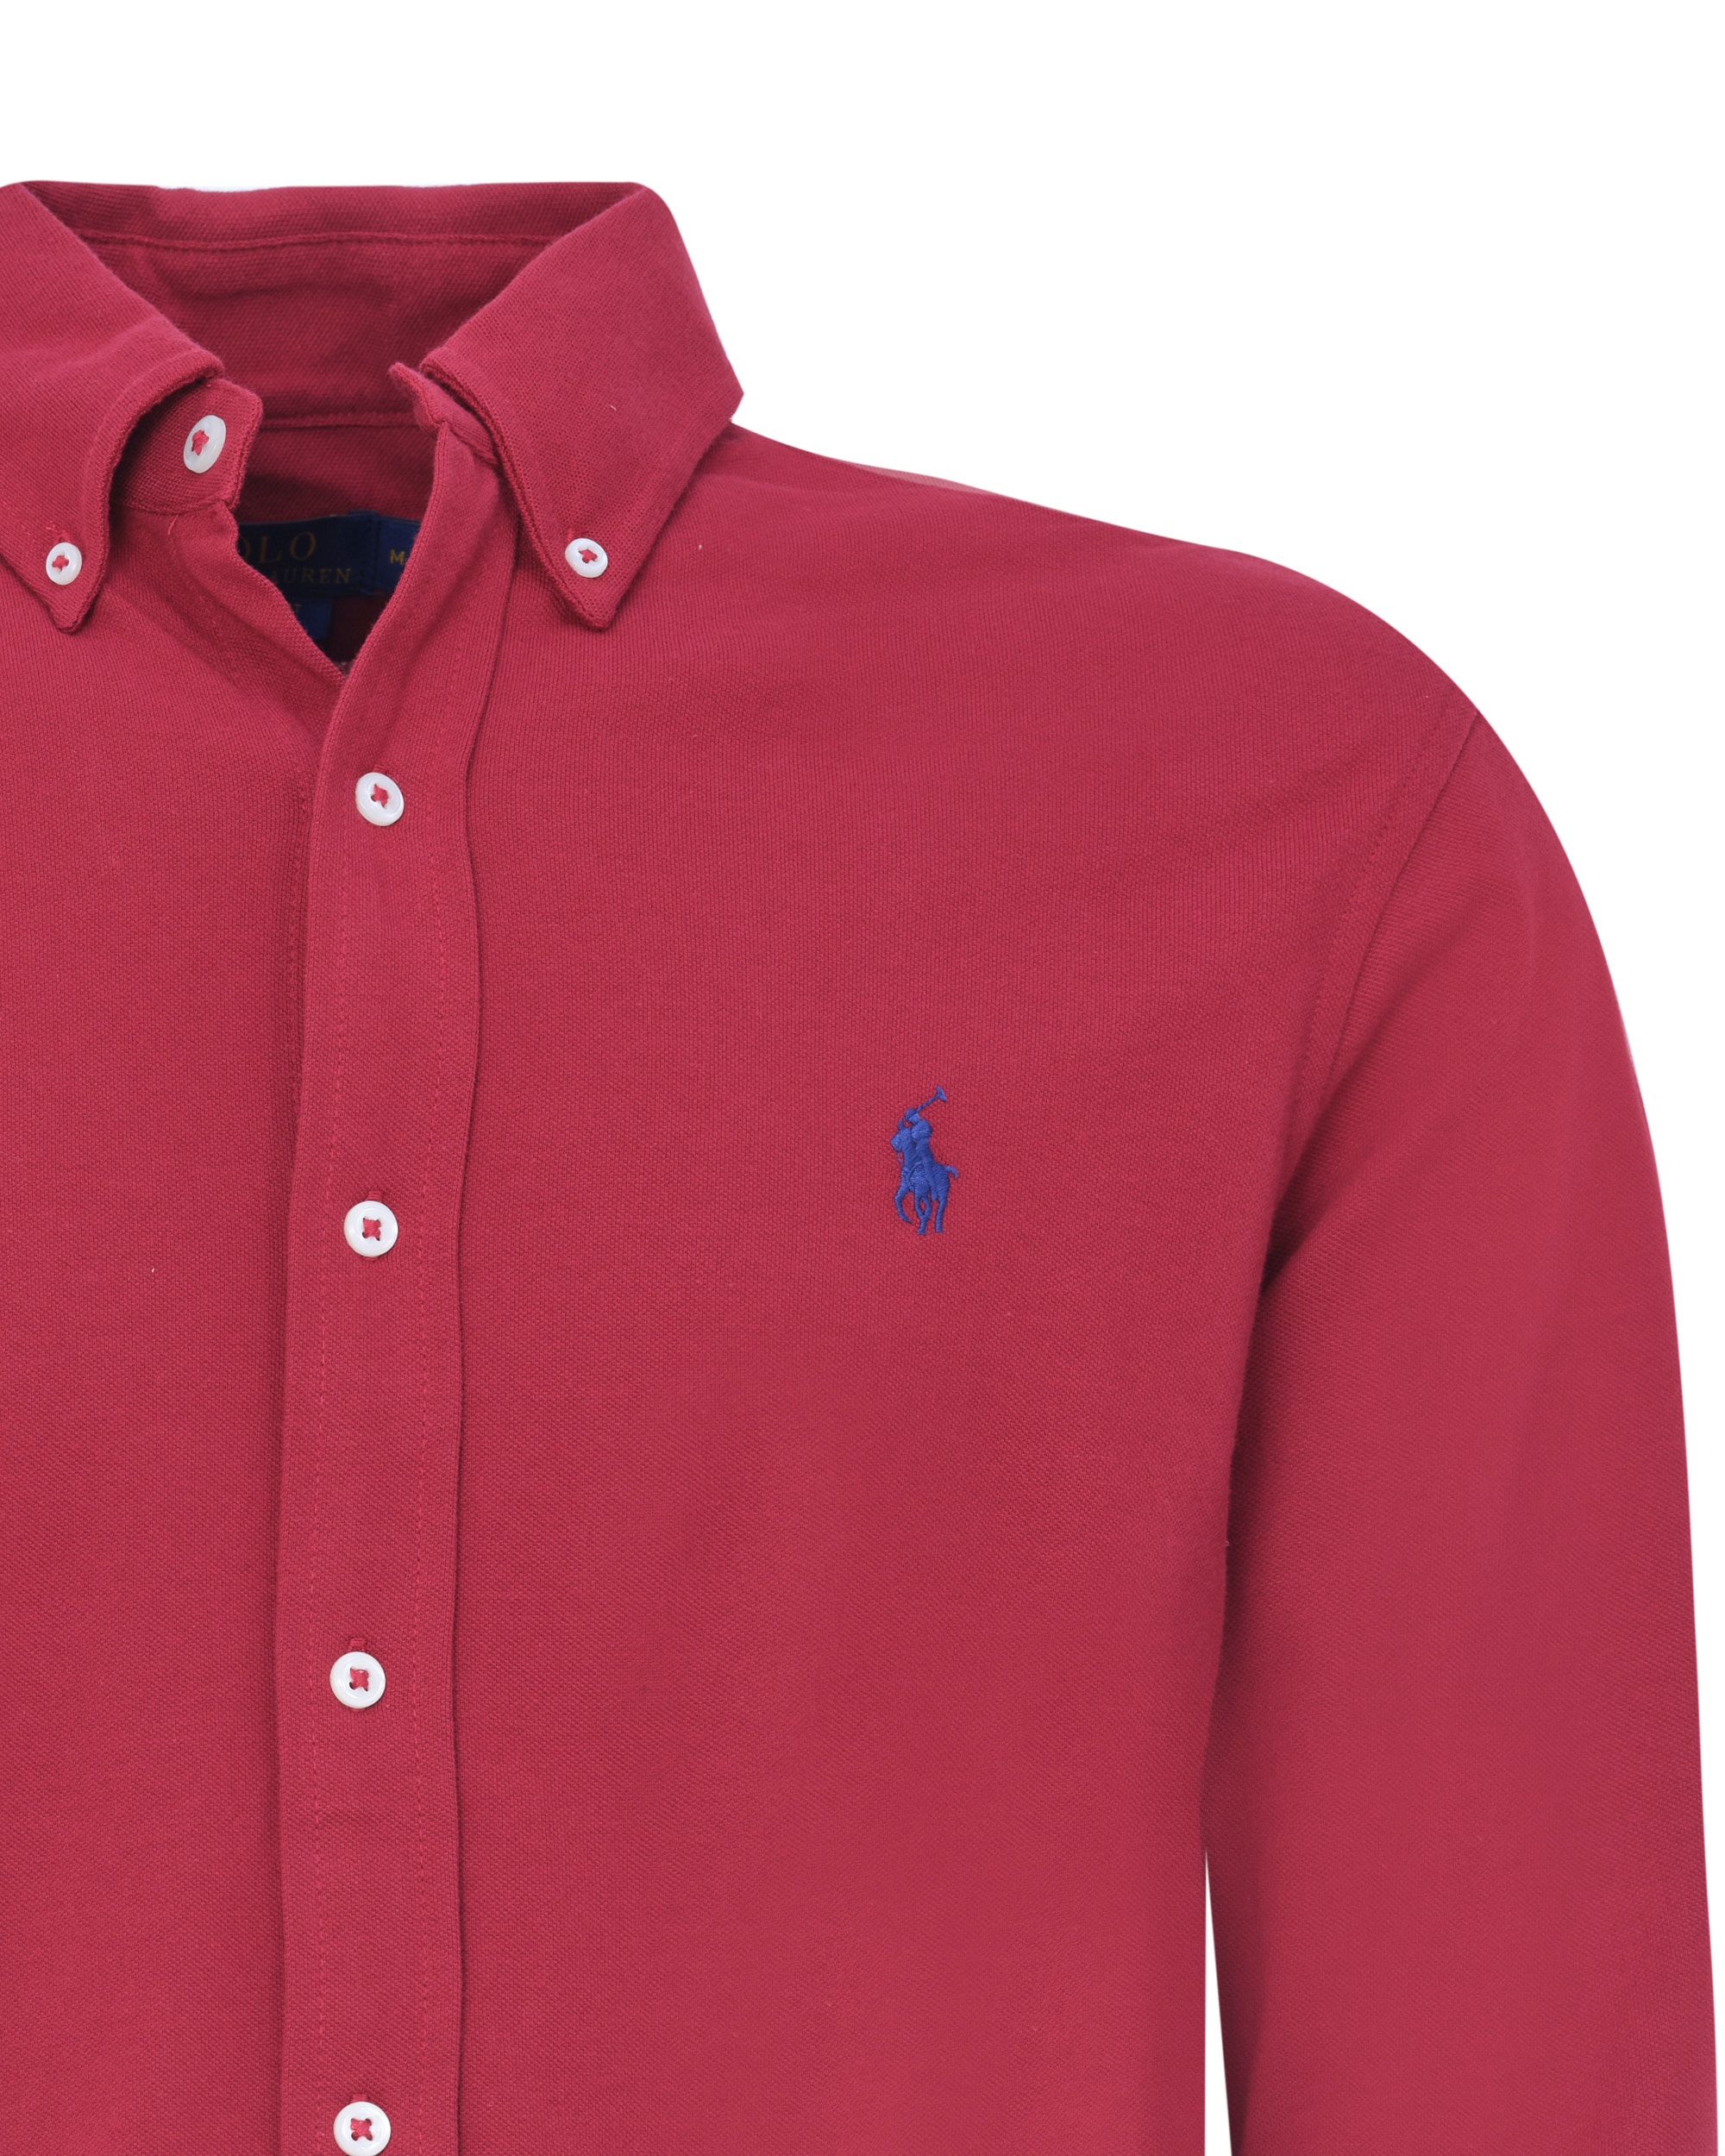 Polo Ralph Lauren Casual Overhemd LM Rood 080583-001-L